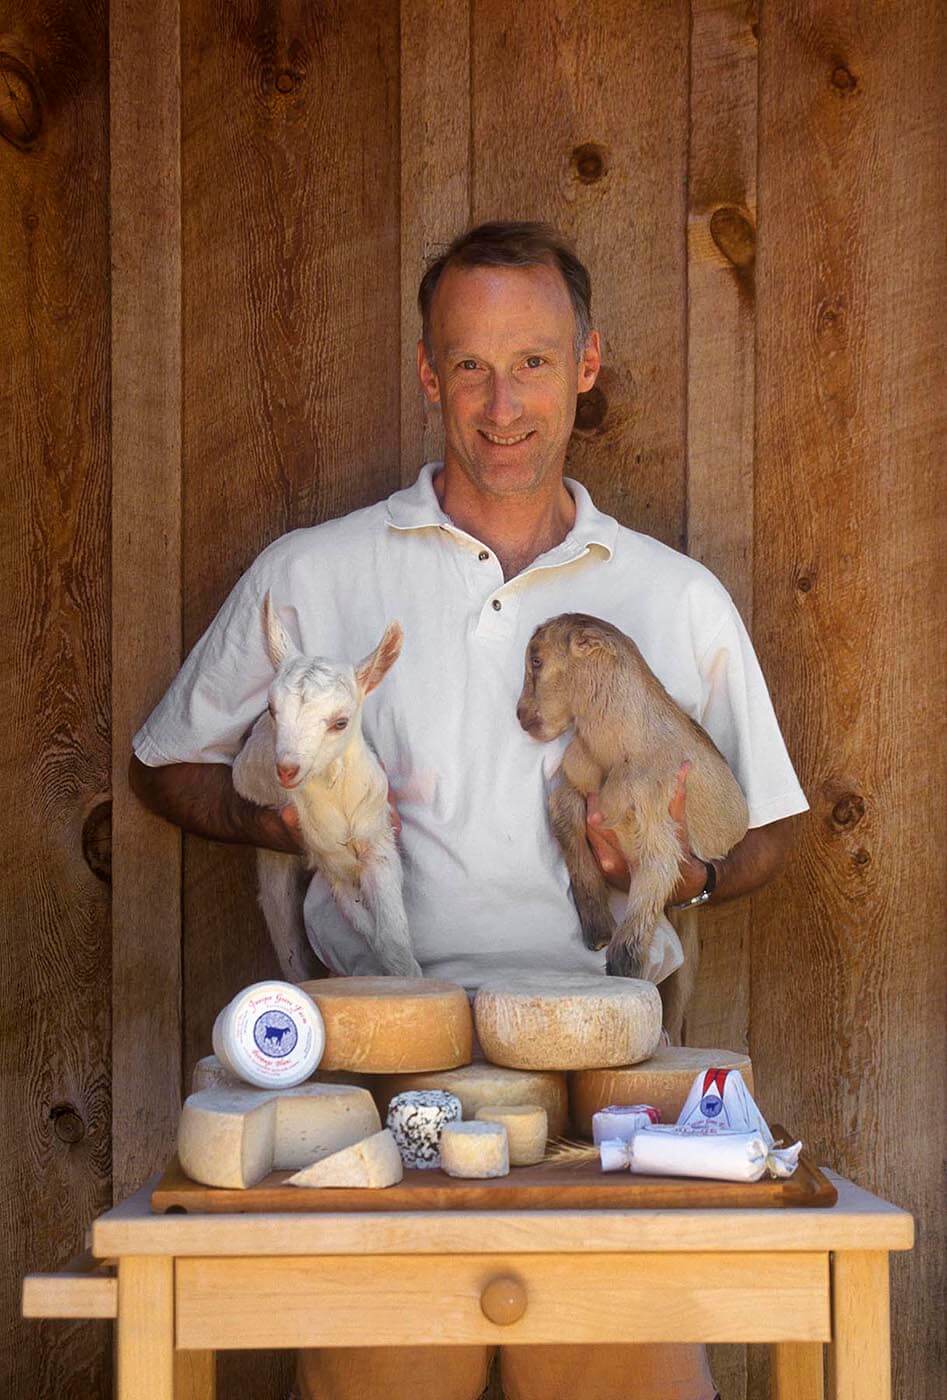 OWNER PIERRE KOLISCH displays a variety of the GOAT CHEESES he produced at JUNIPER GROVE FARM in REDMOND OREGON. - Photography by Eagle Visions Photography